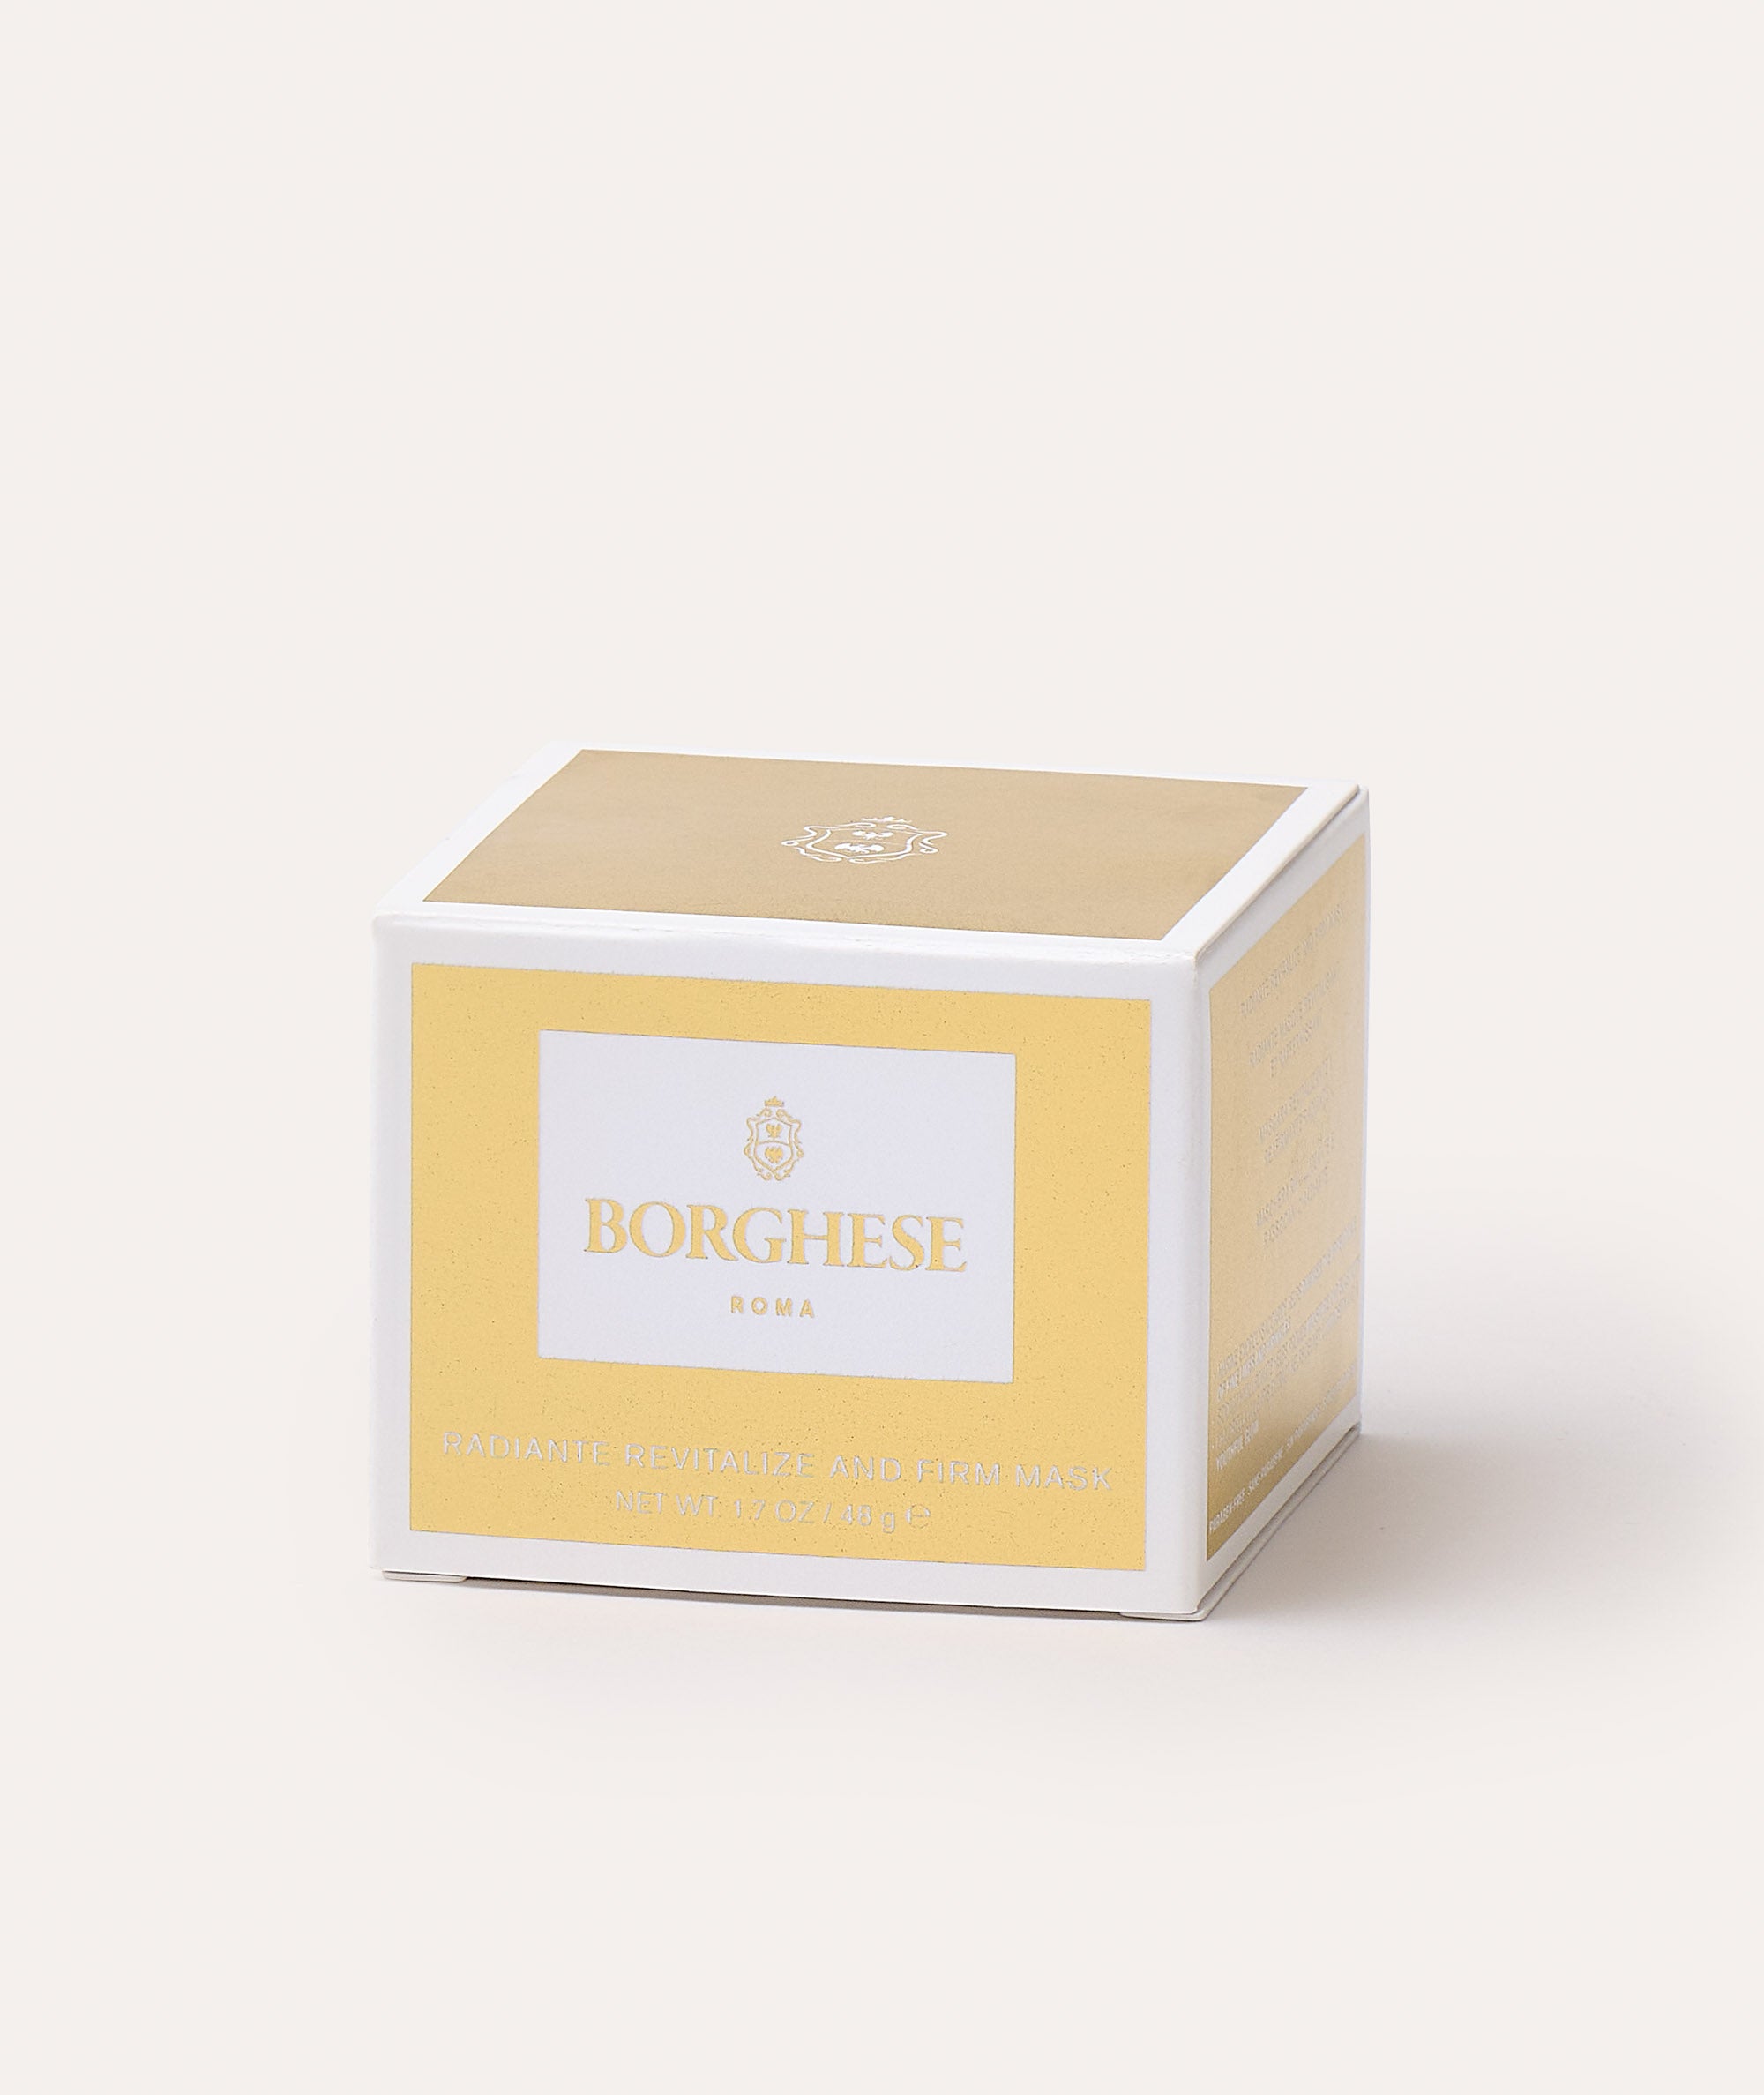 This is a picture of the Borghese Radiante Revitalize and Firm Mask in a box